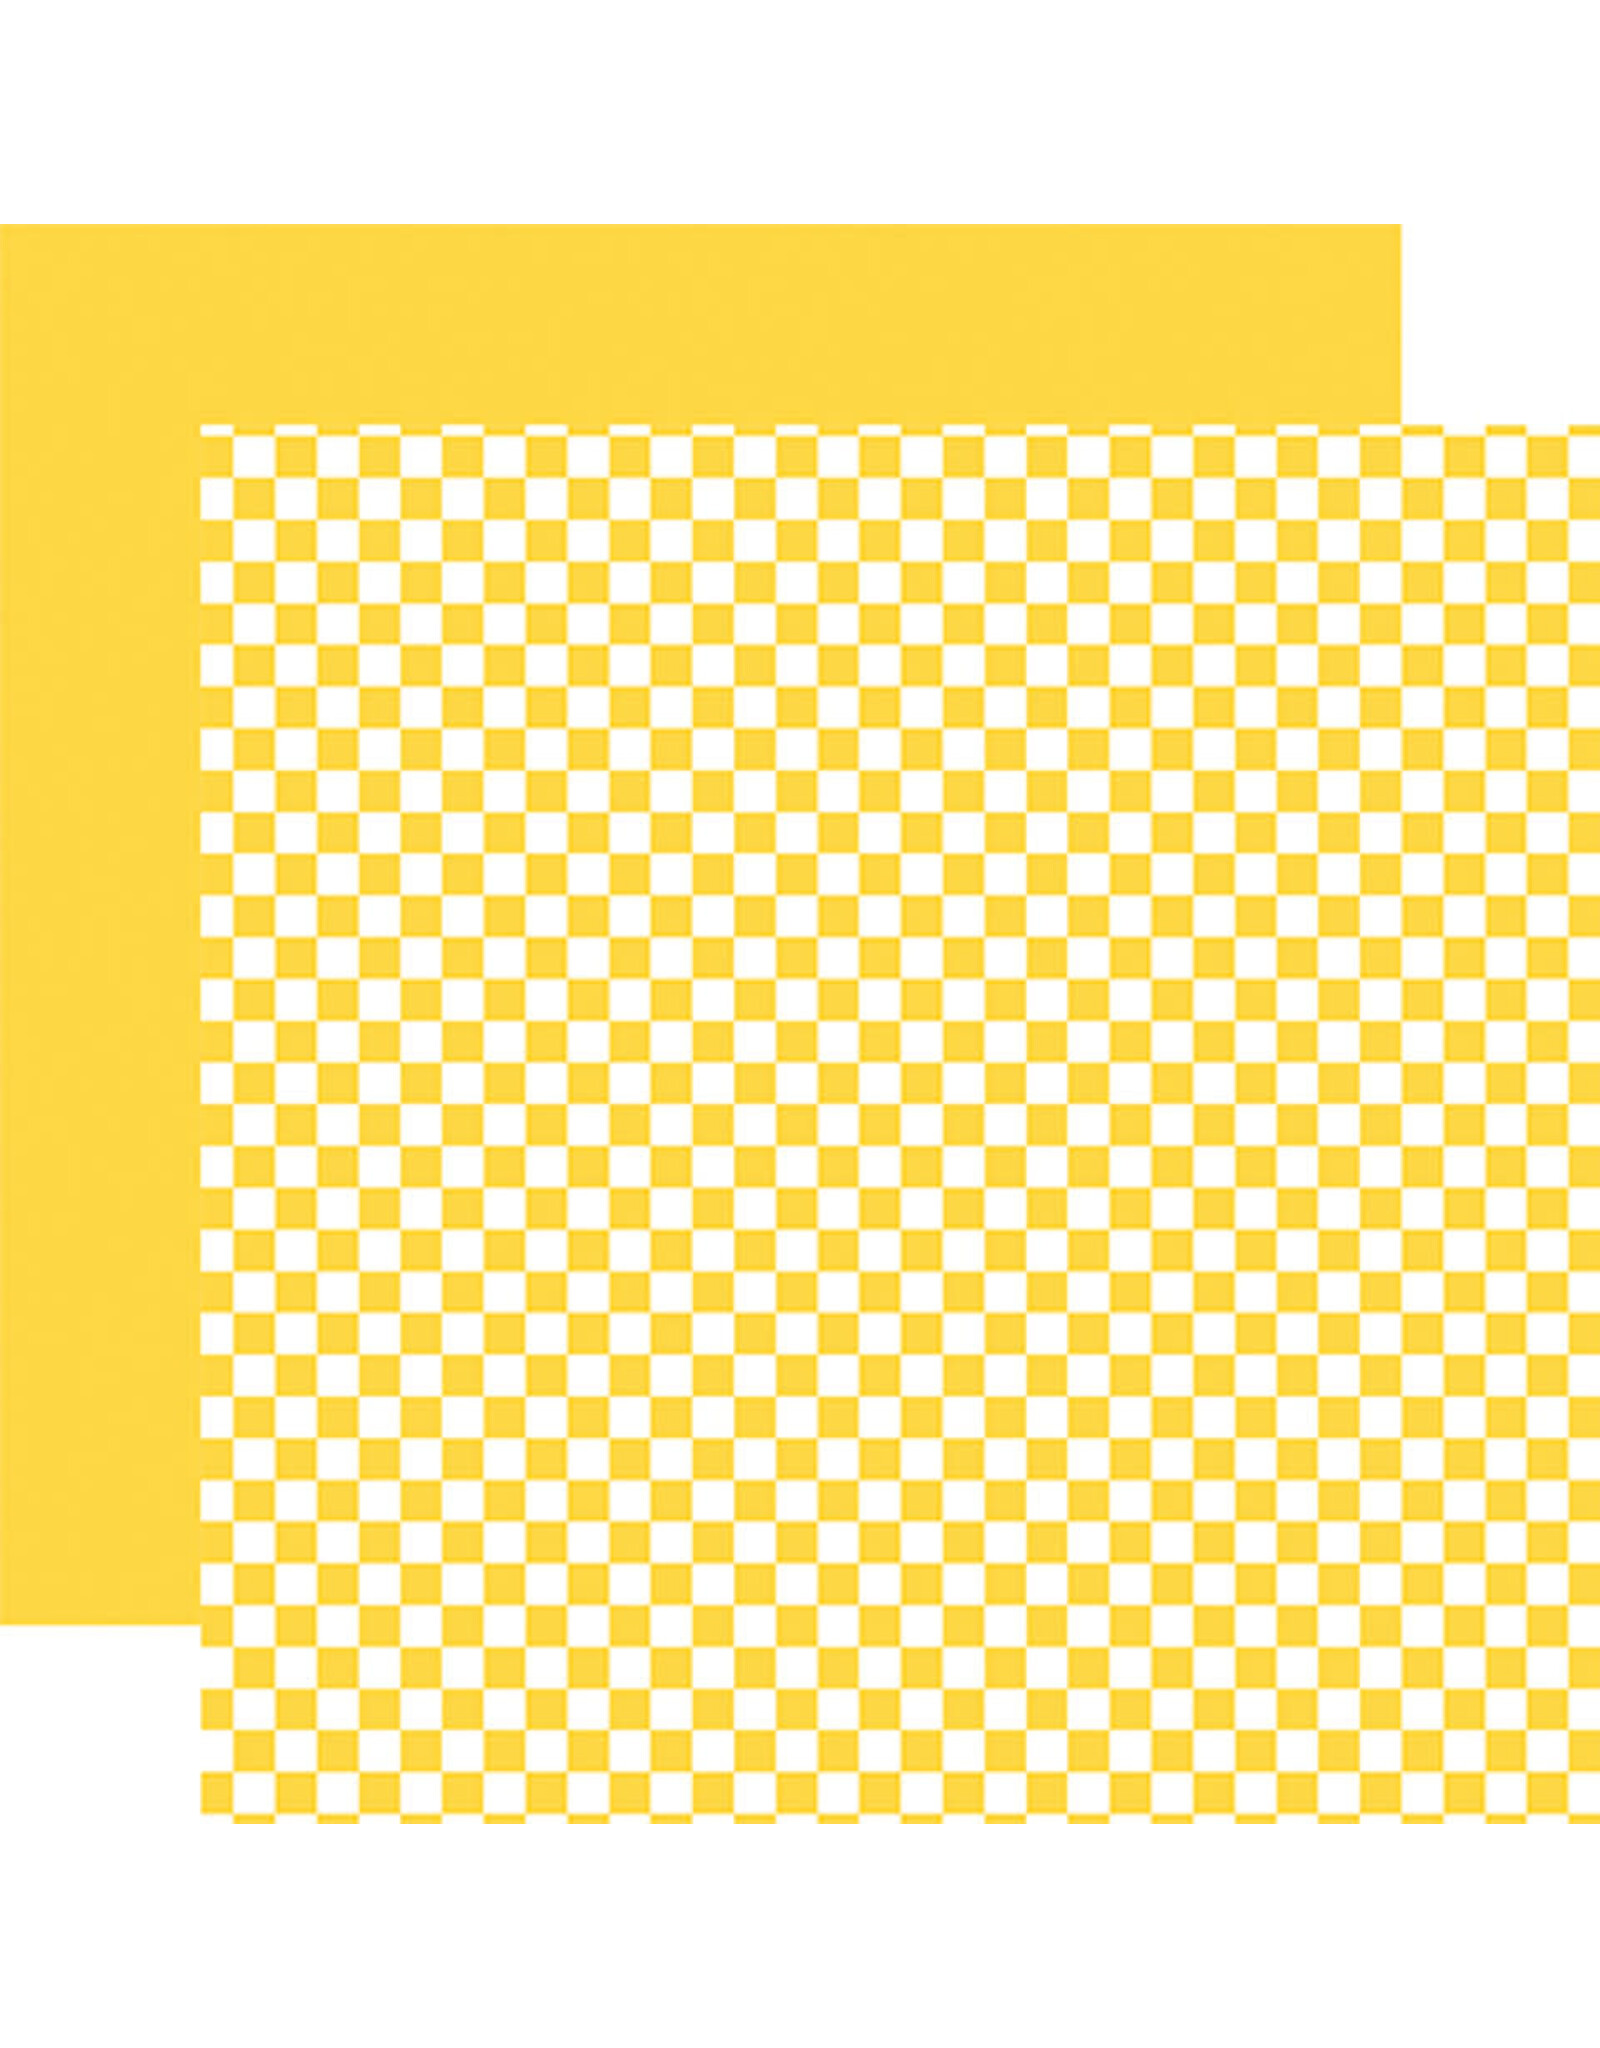 Echo Park Checkerboard:  Sunshine 12x12 Patterned Paper